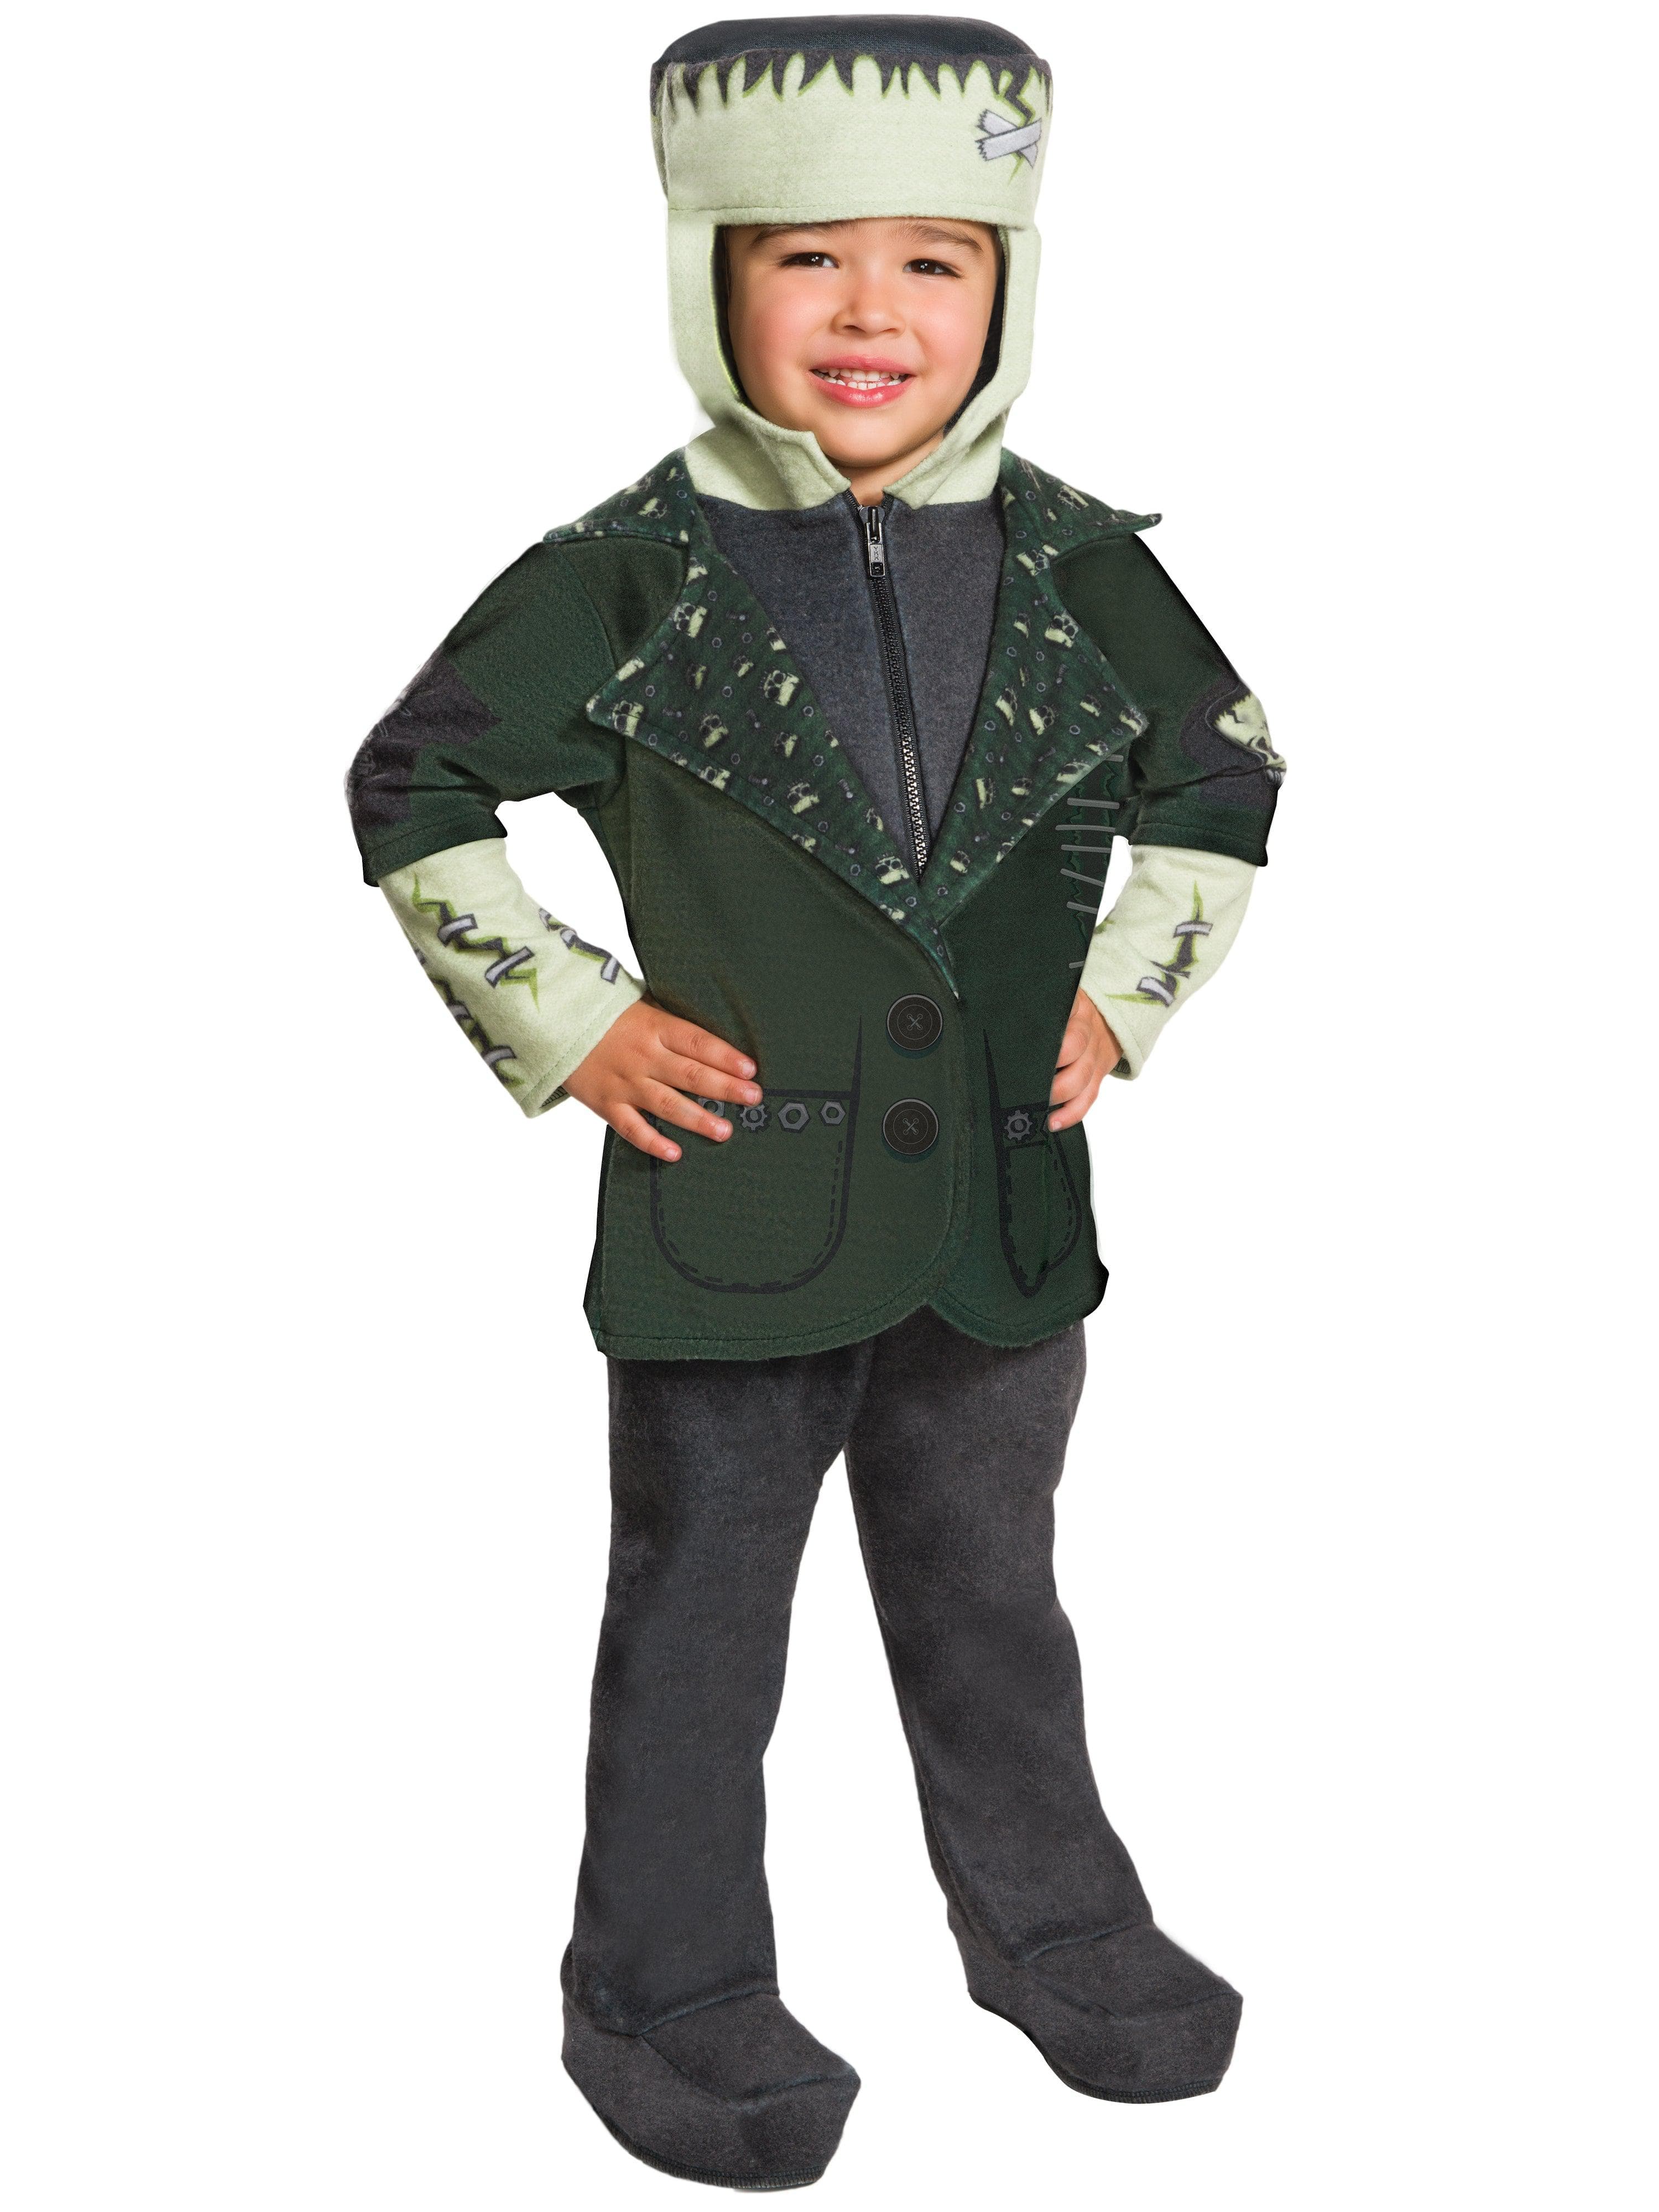 Universal Monsters Frankenstein Costume for Toddlers - costumes.com